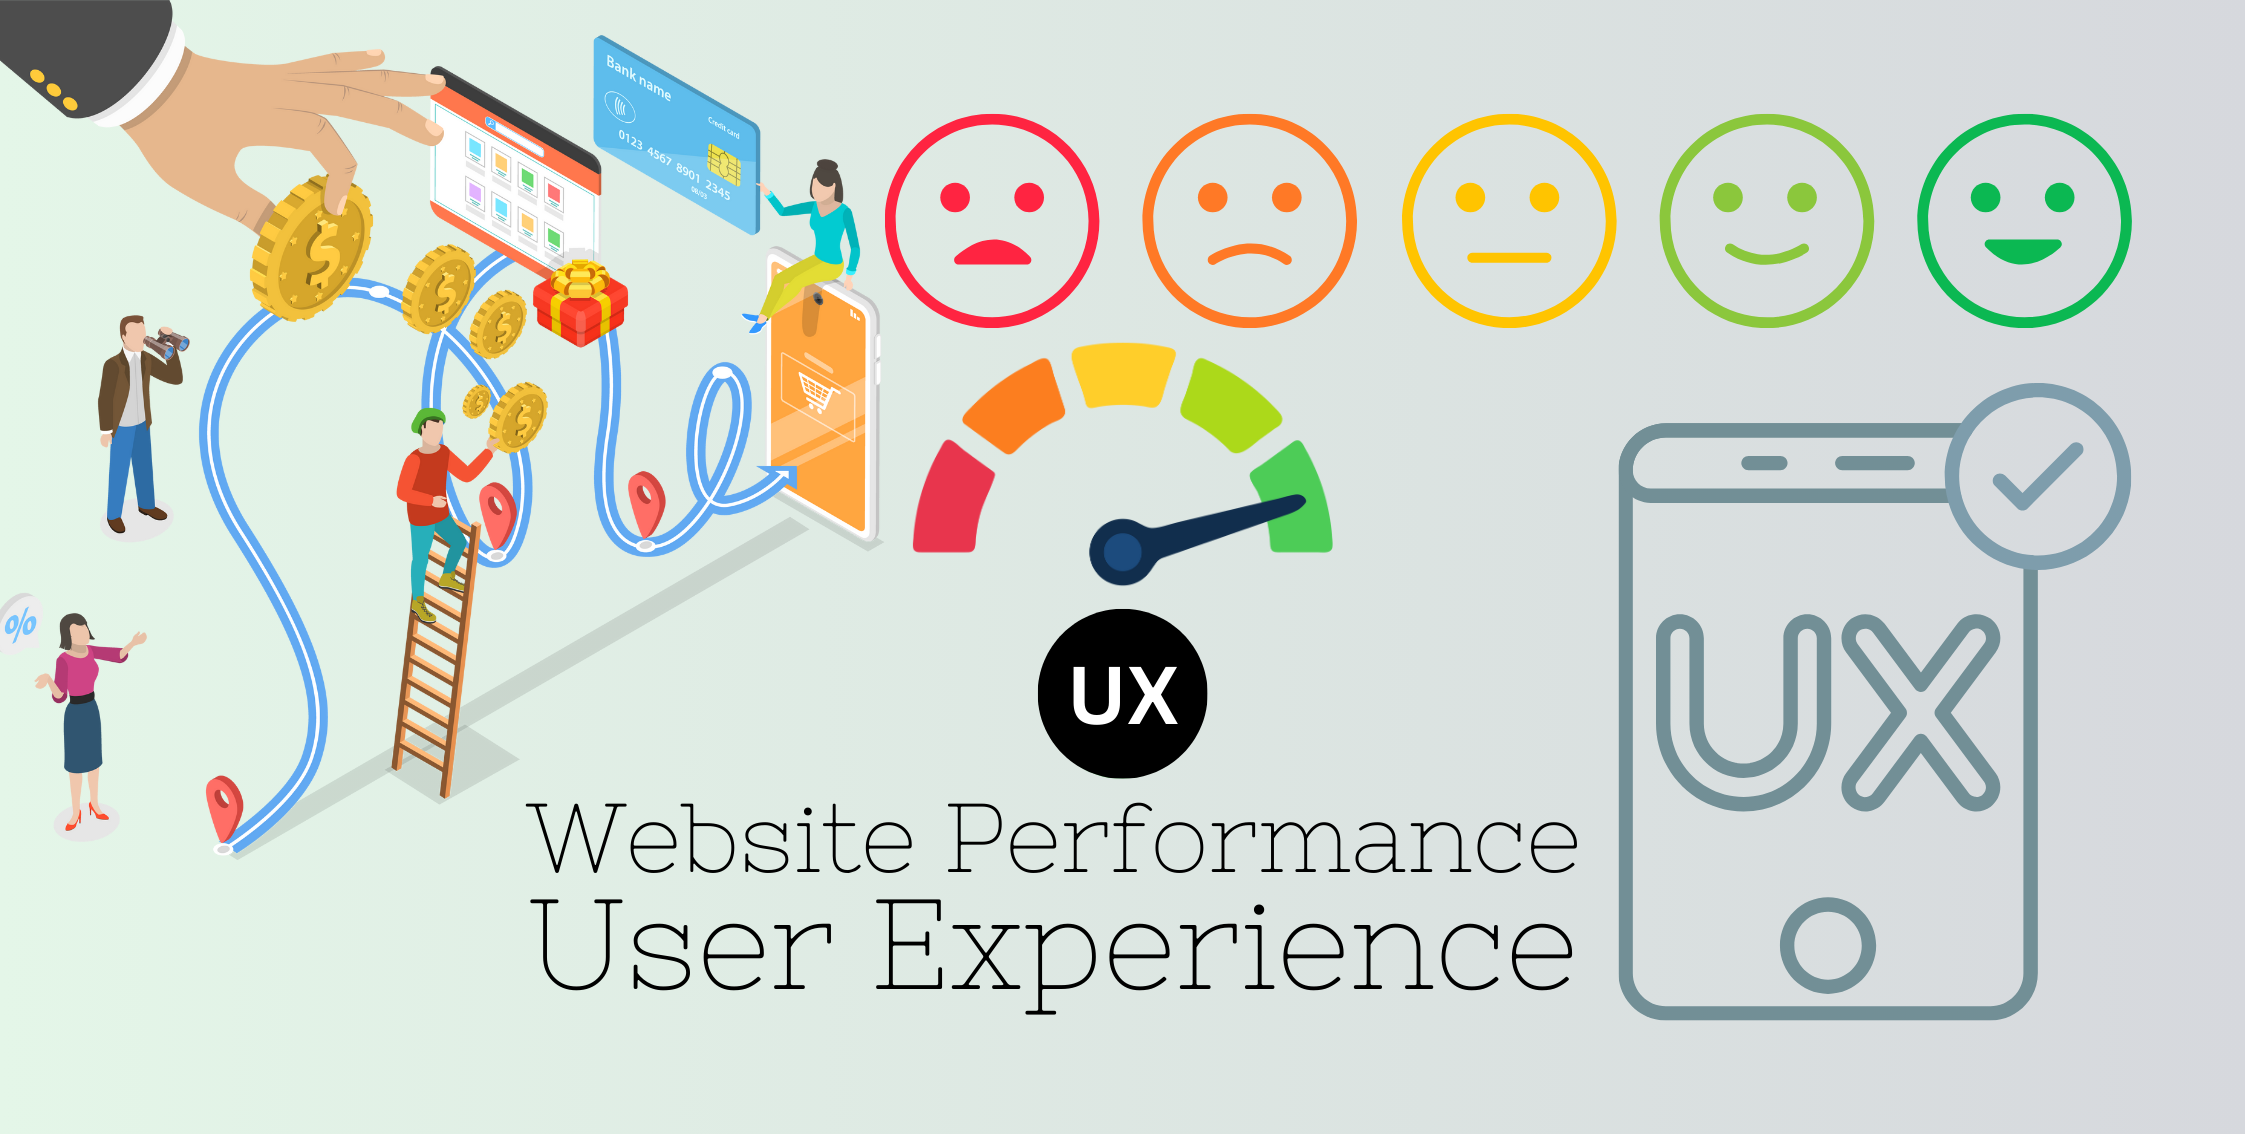 How to Evaluate a Website User Experience?